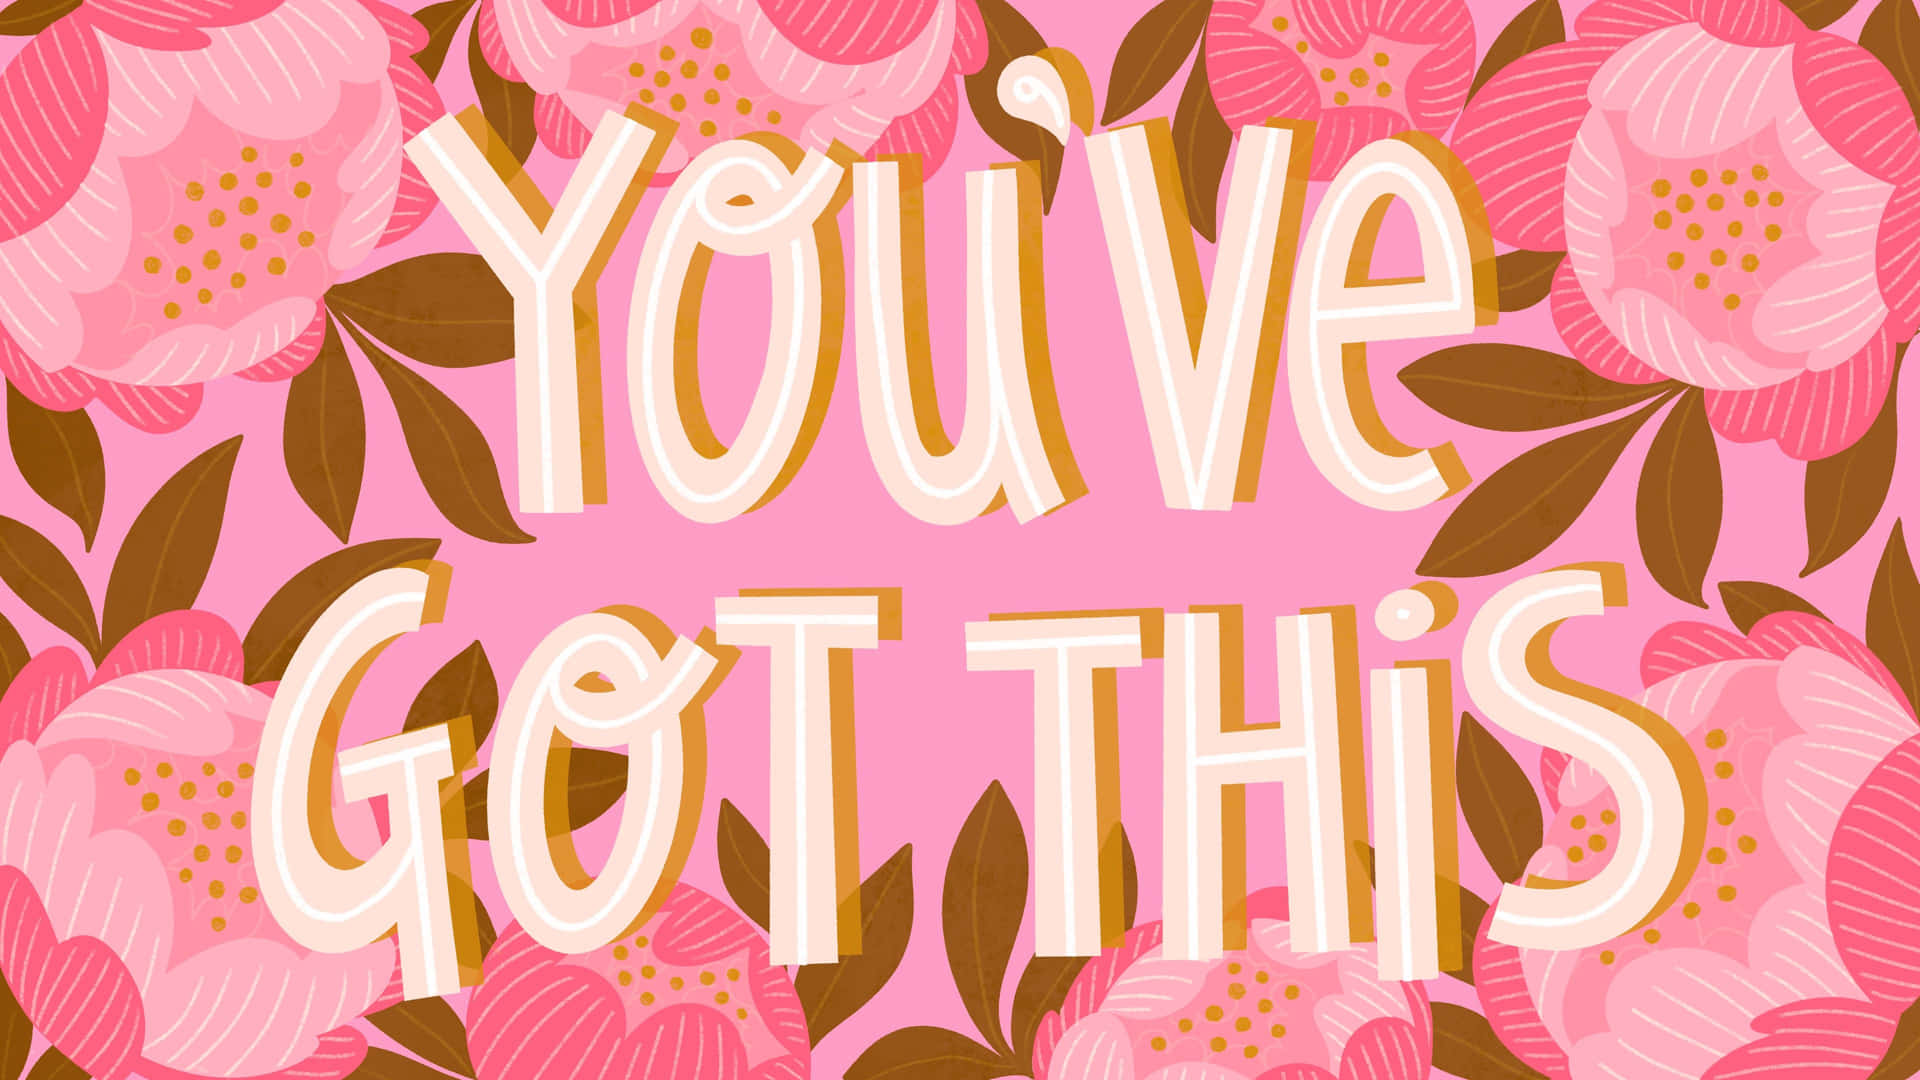 You've Got This - Pink Floral Print Wallpaper